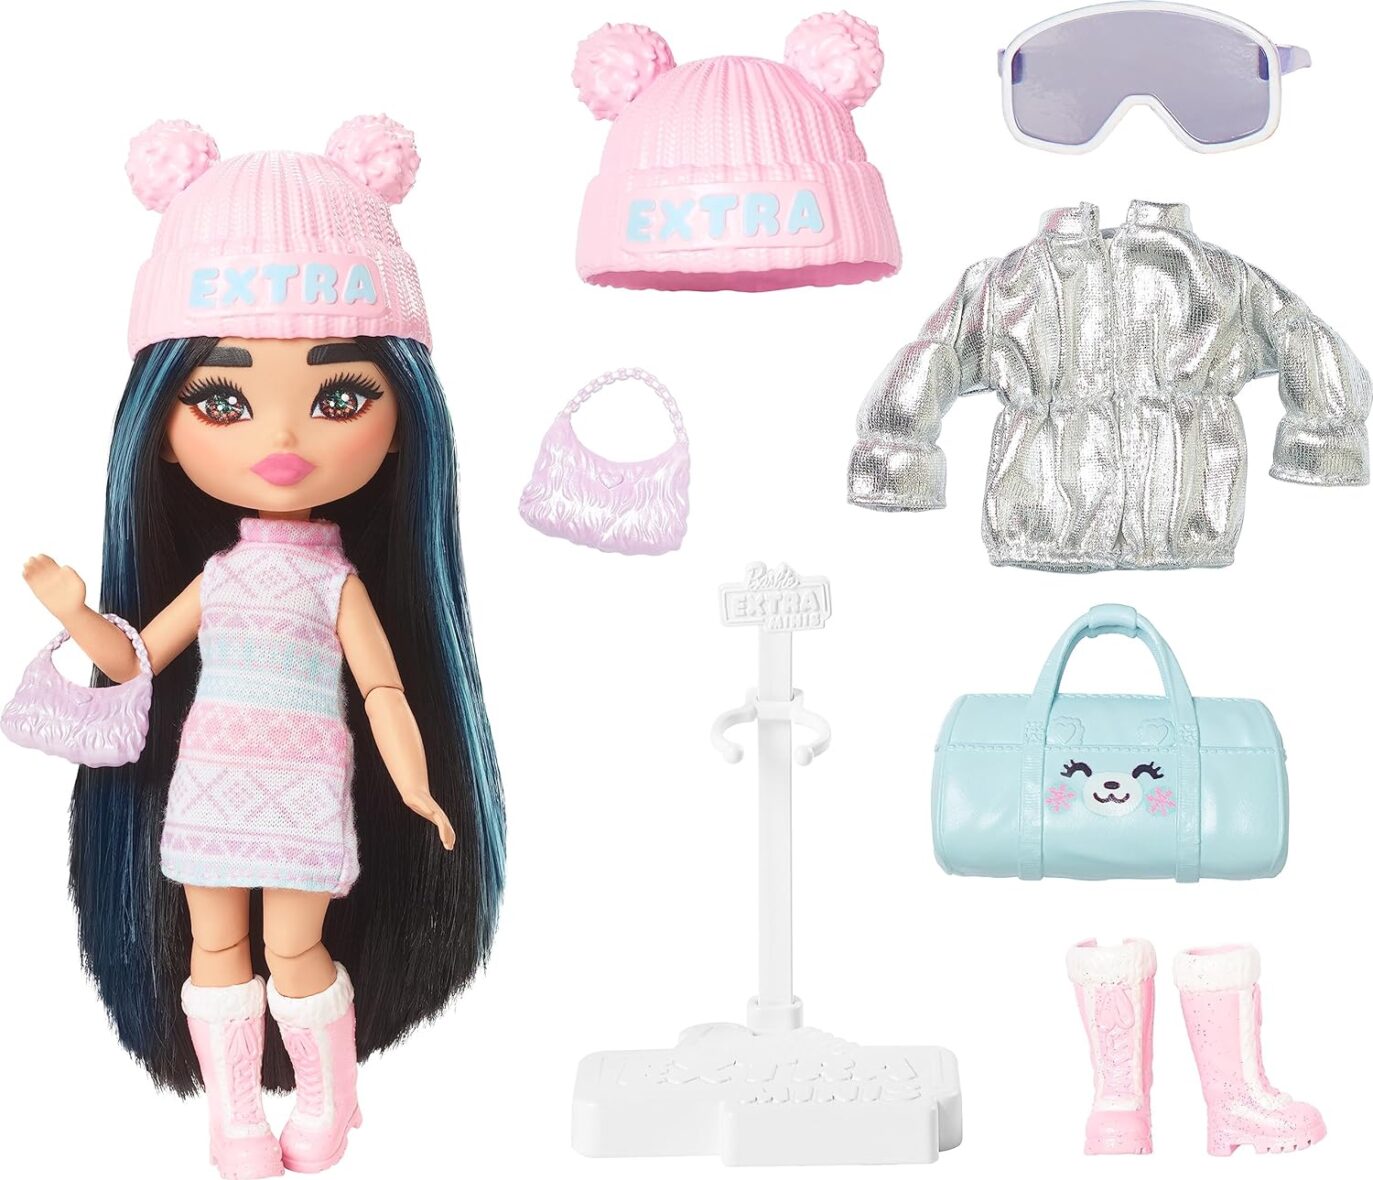 Barbie Extra Fly Minis Travel Doll, Snowy Look with Icy Blue Highlights in Pastel Sweater Dress & Accessories